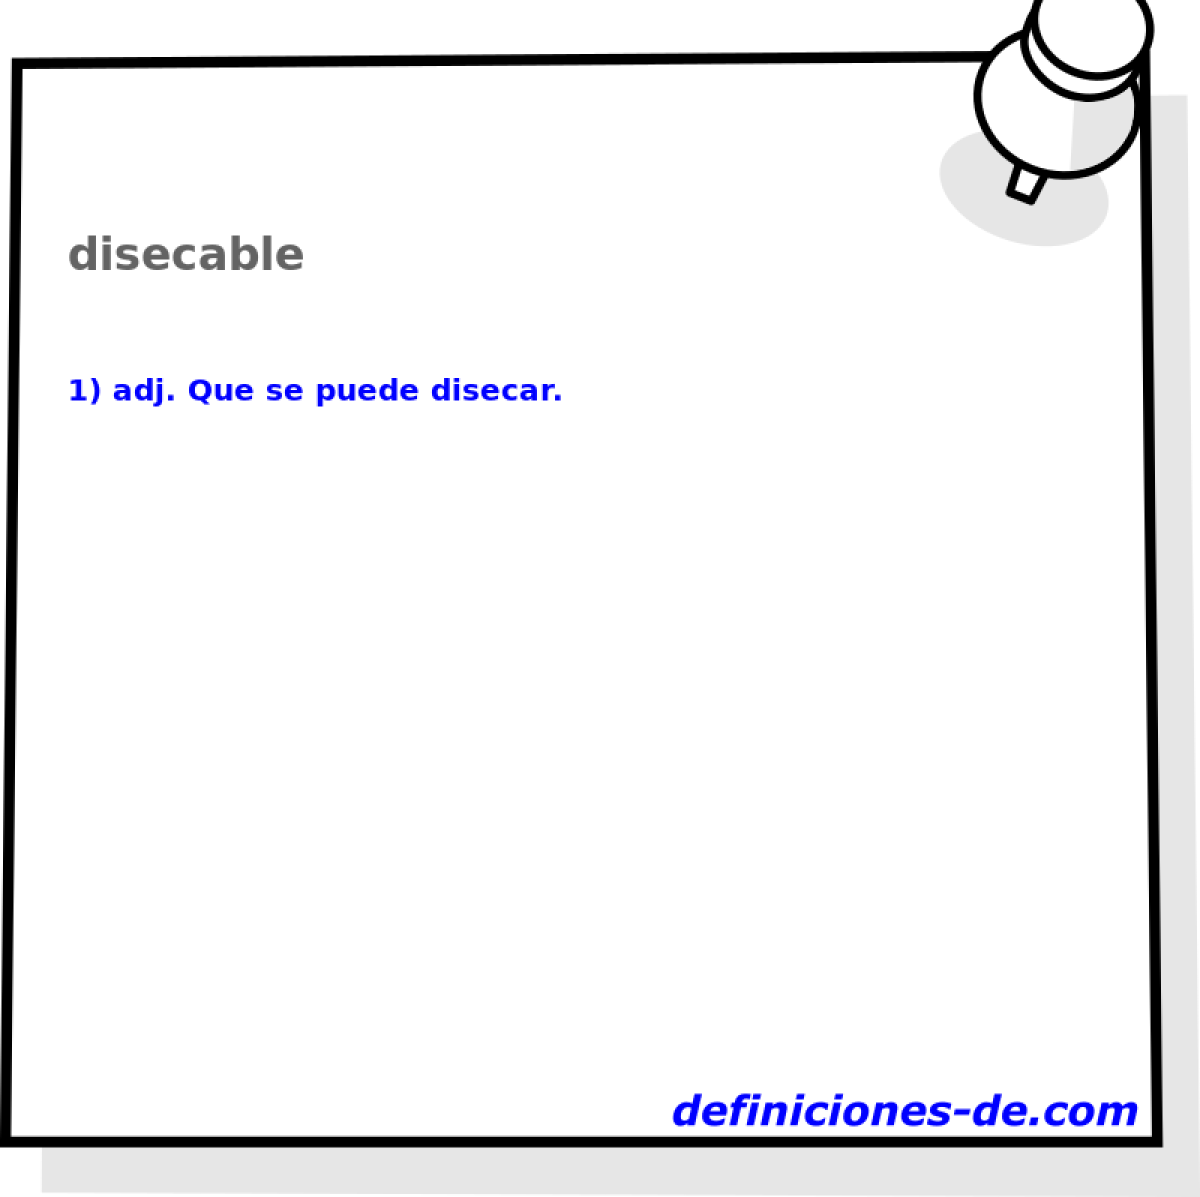 disecable 